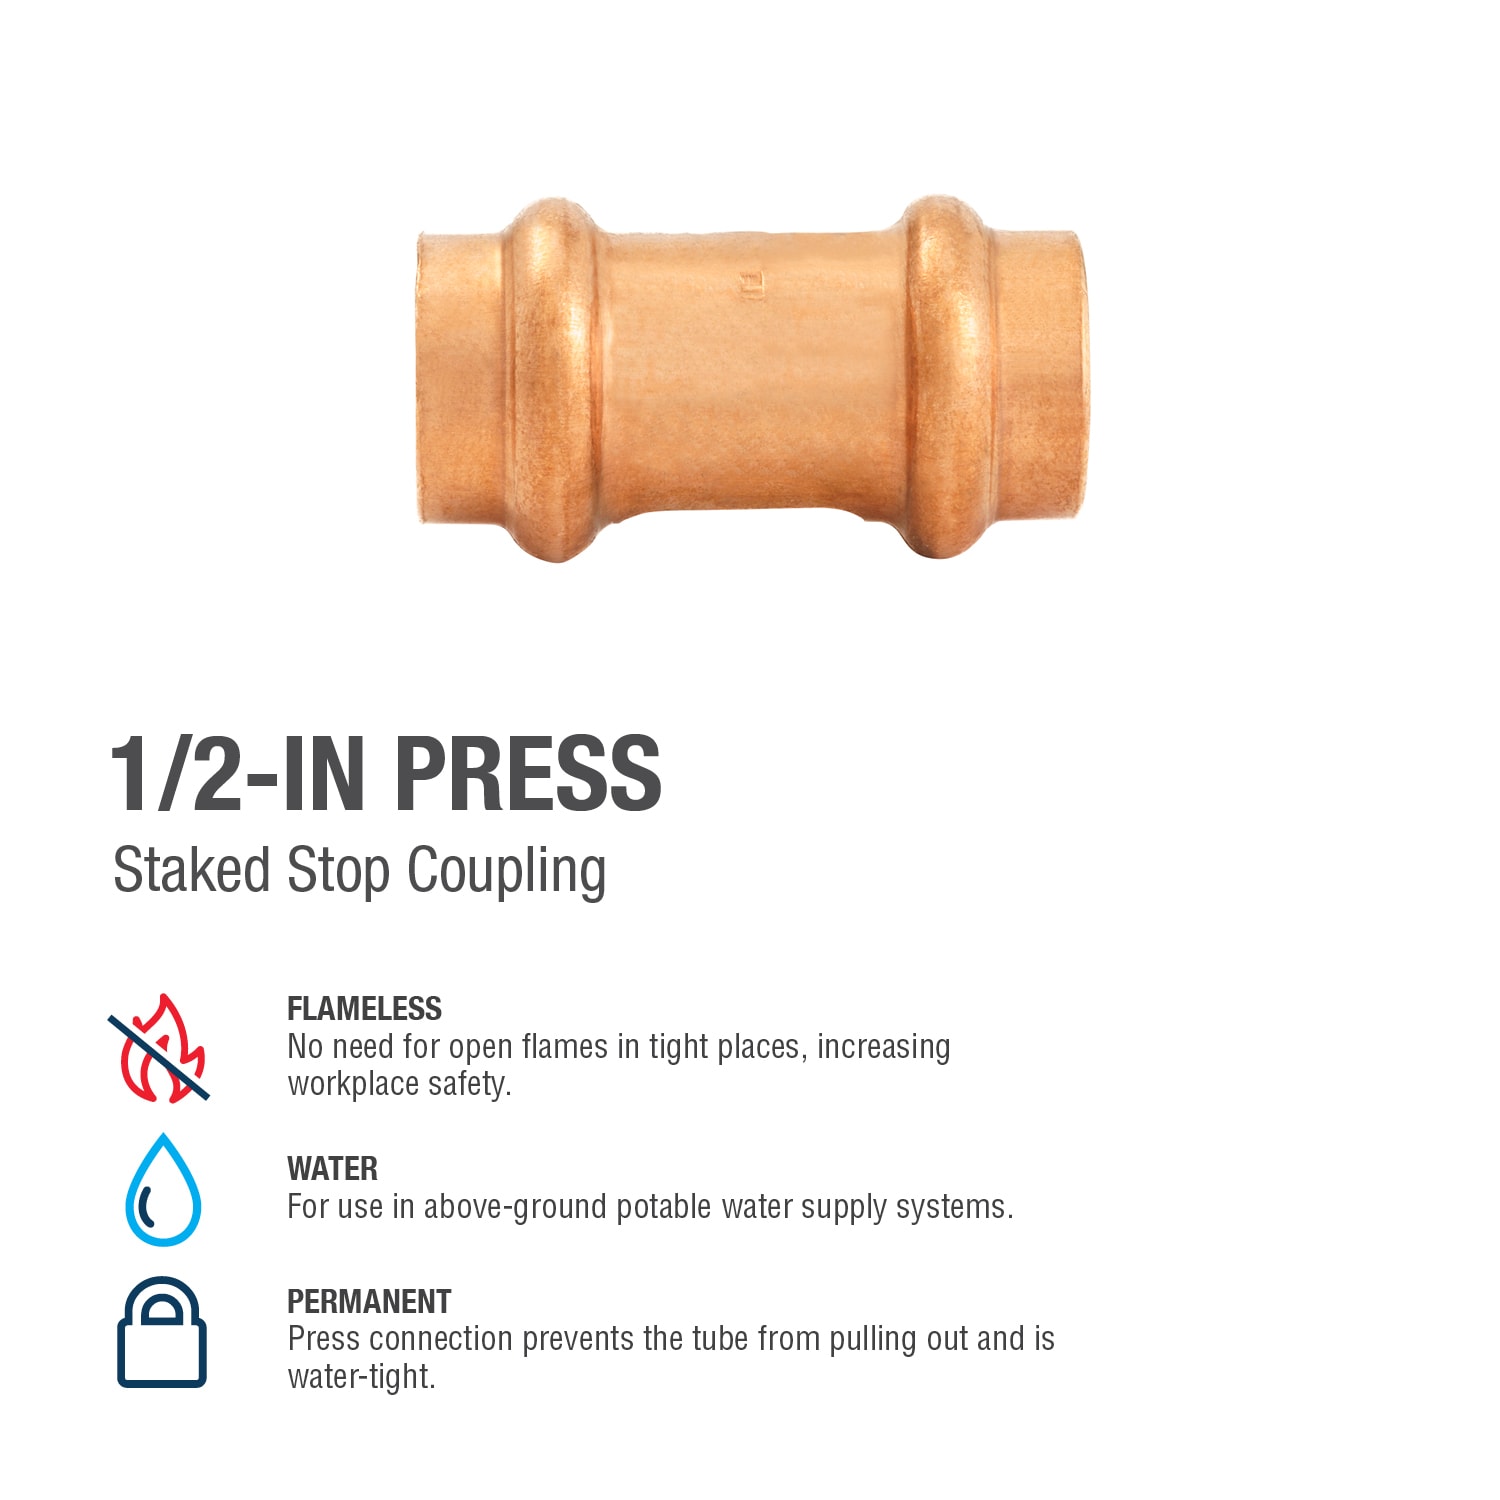 Plumbing Parts Identification: Water Pipe Fittings Episode 5 - Copper Press  Fittings 